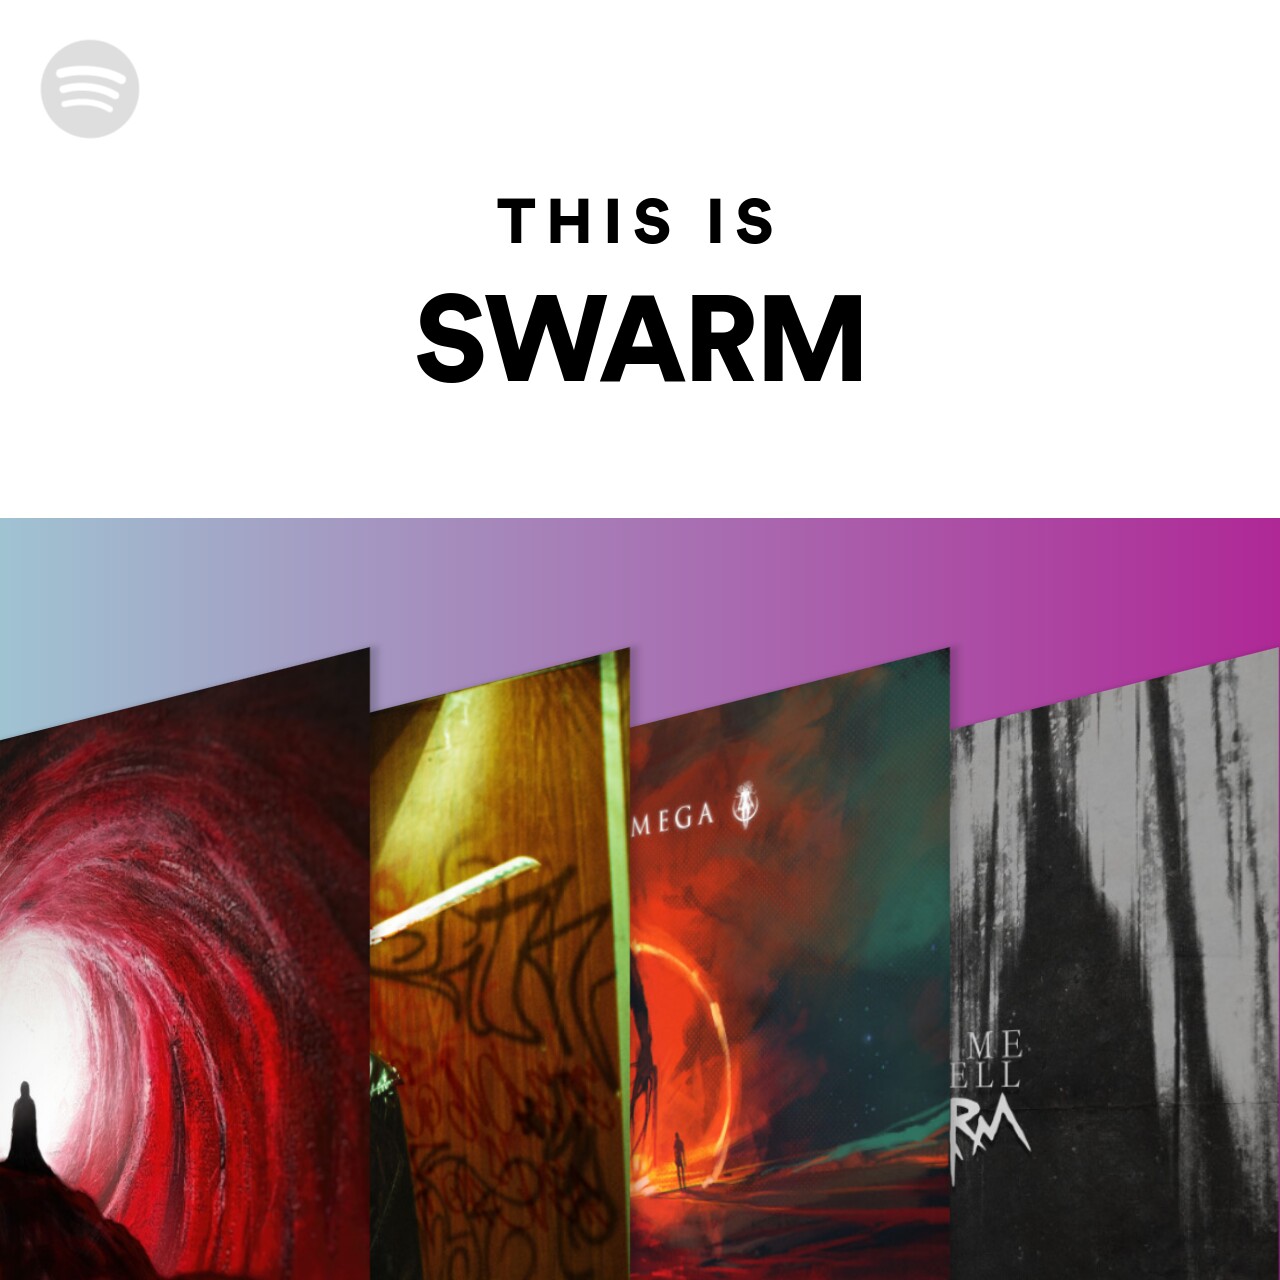 This Is SWARM